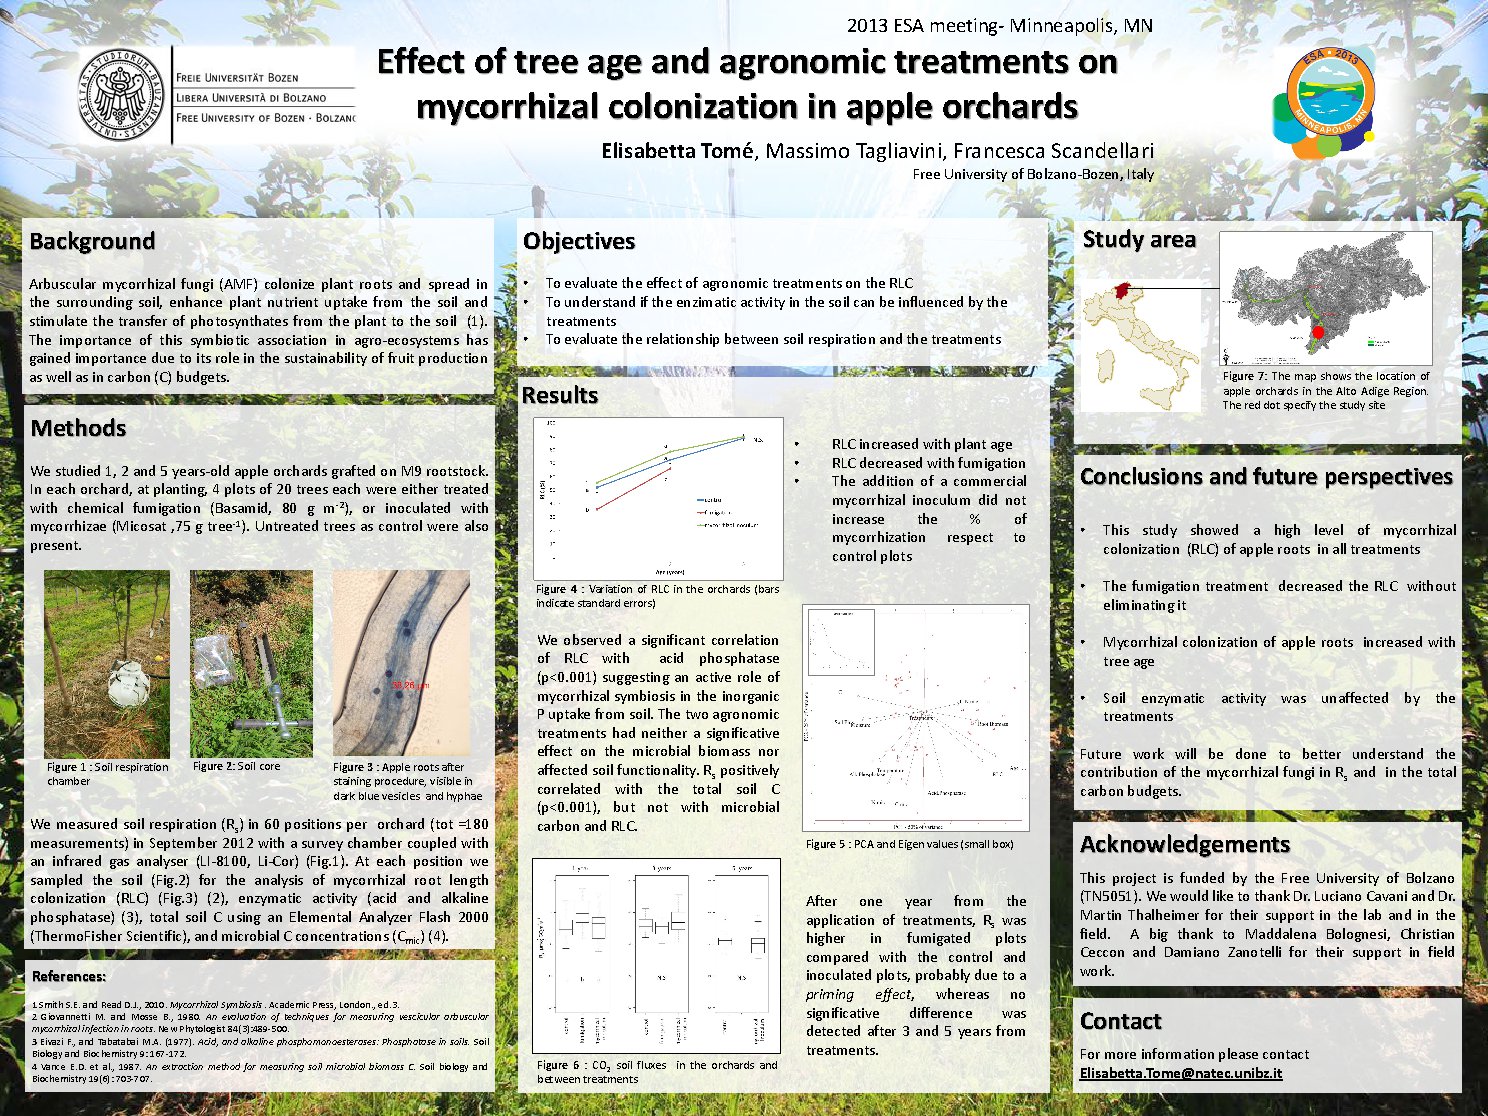 Effect Of Tree Age And Agronomic Treatments On Mycorrhizal Colonization In Apple Orchards by et1